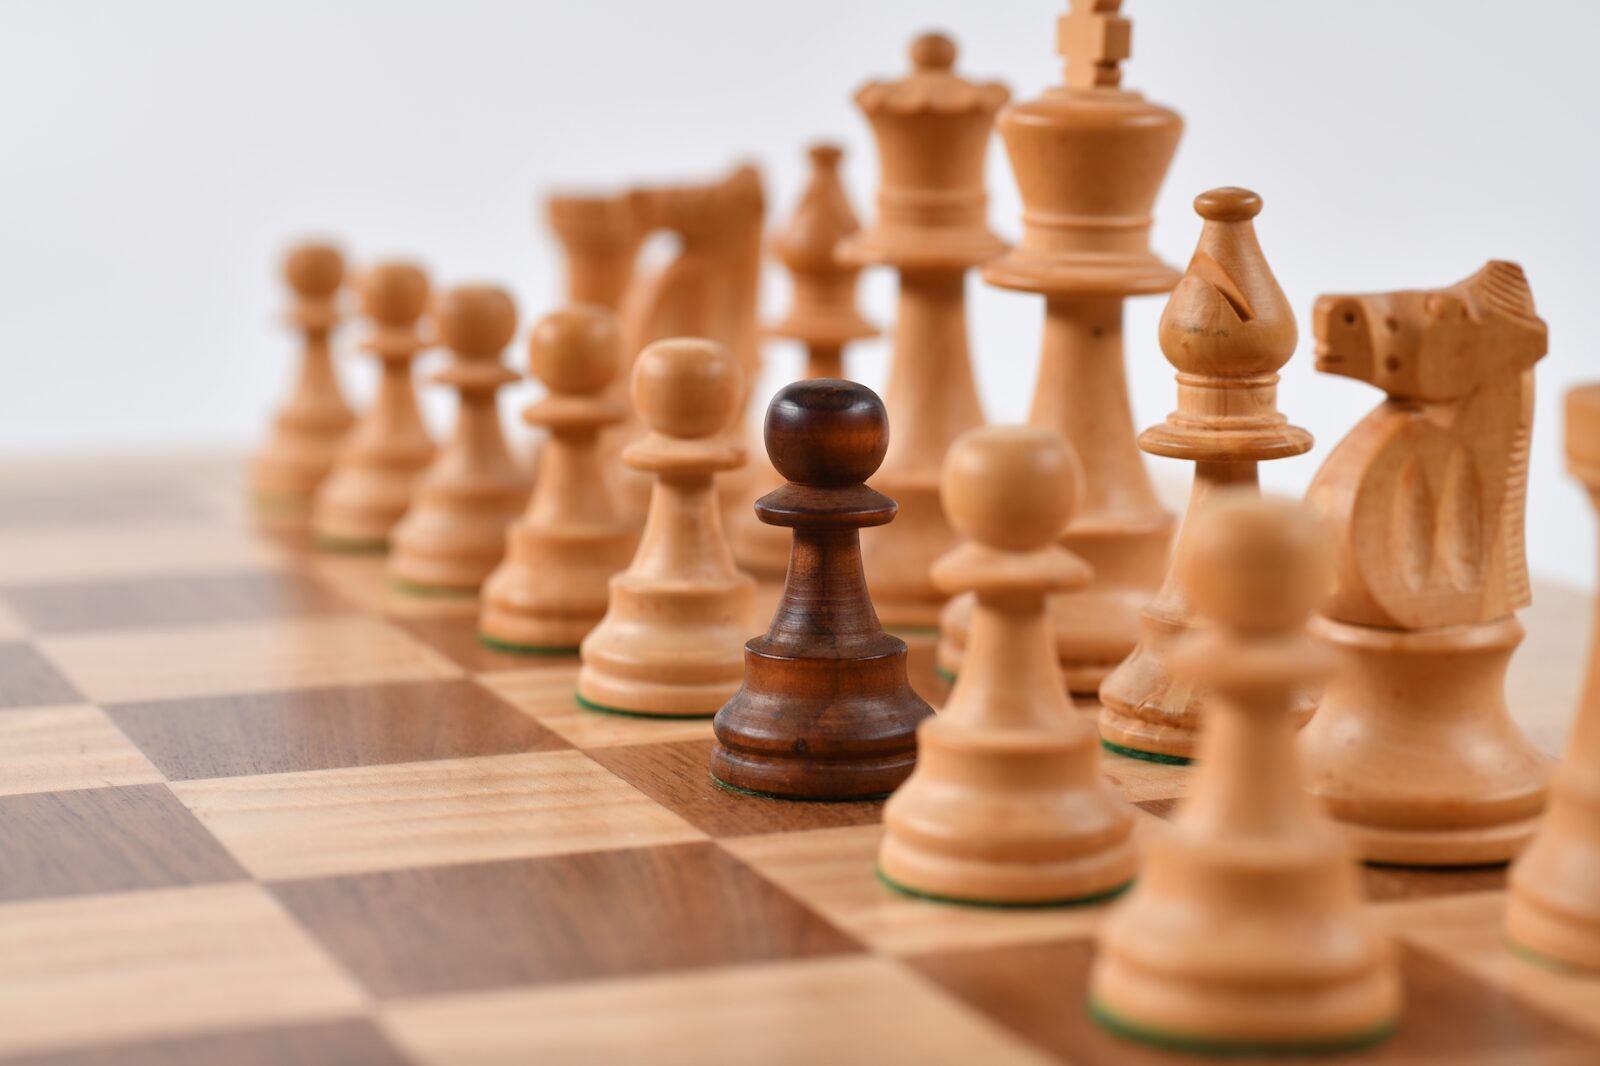 Who is the chess player in India? - Quora